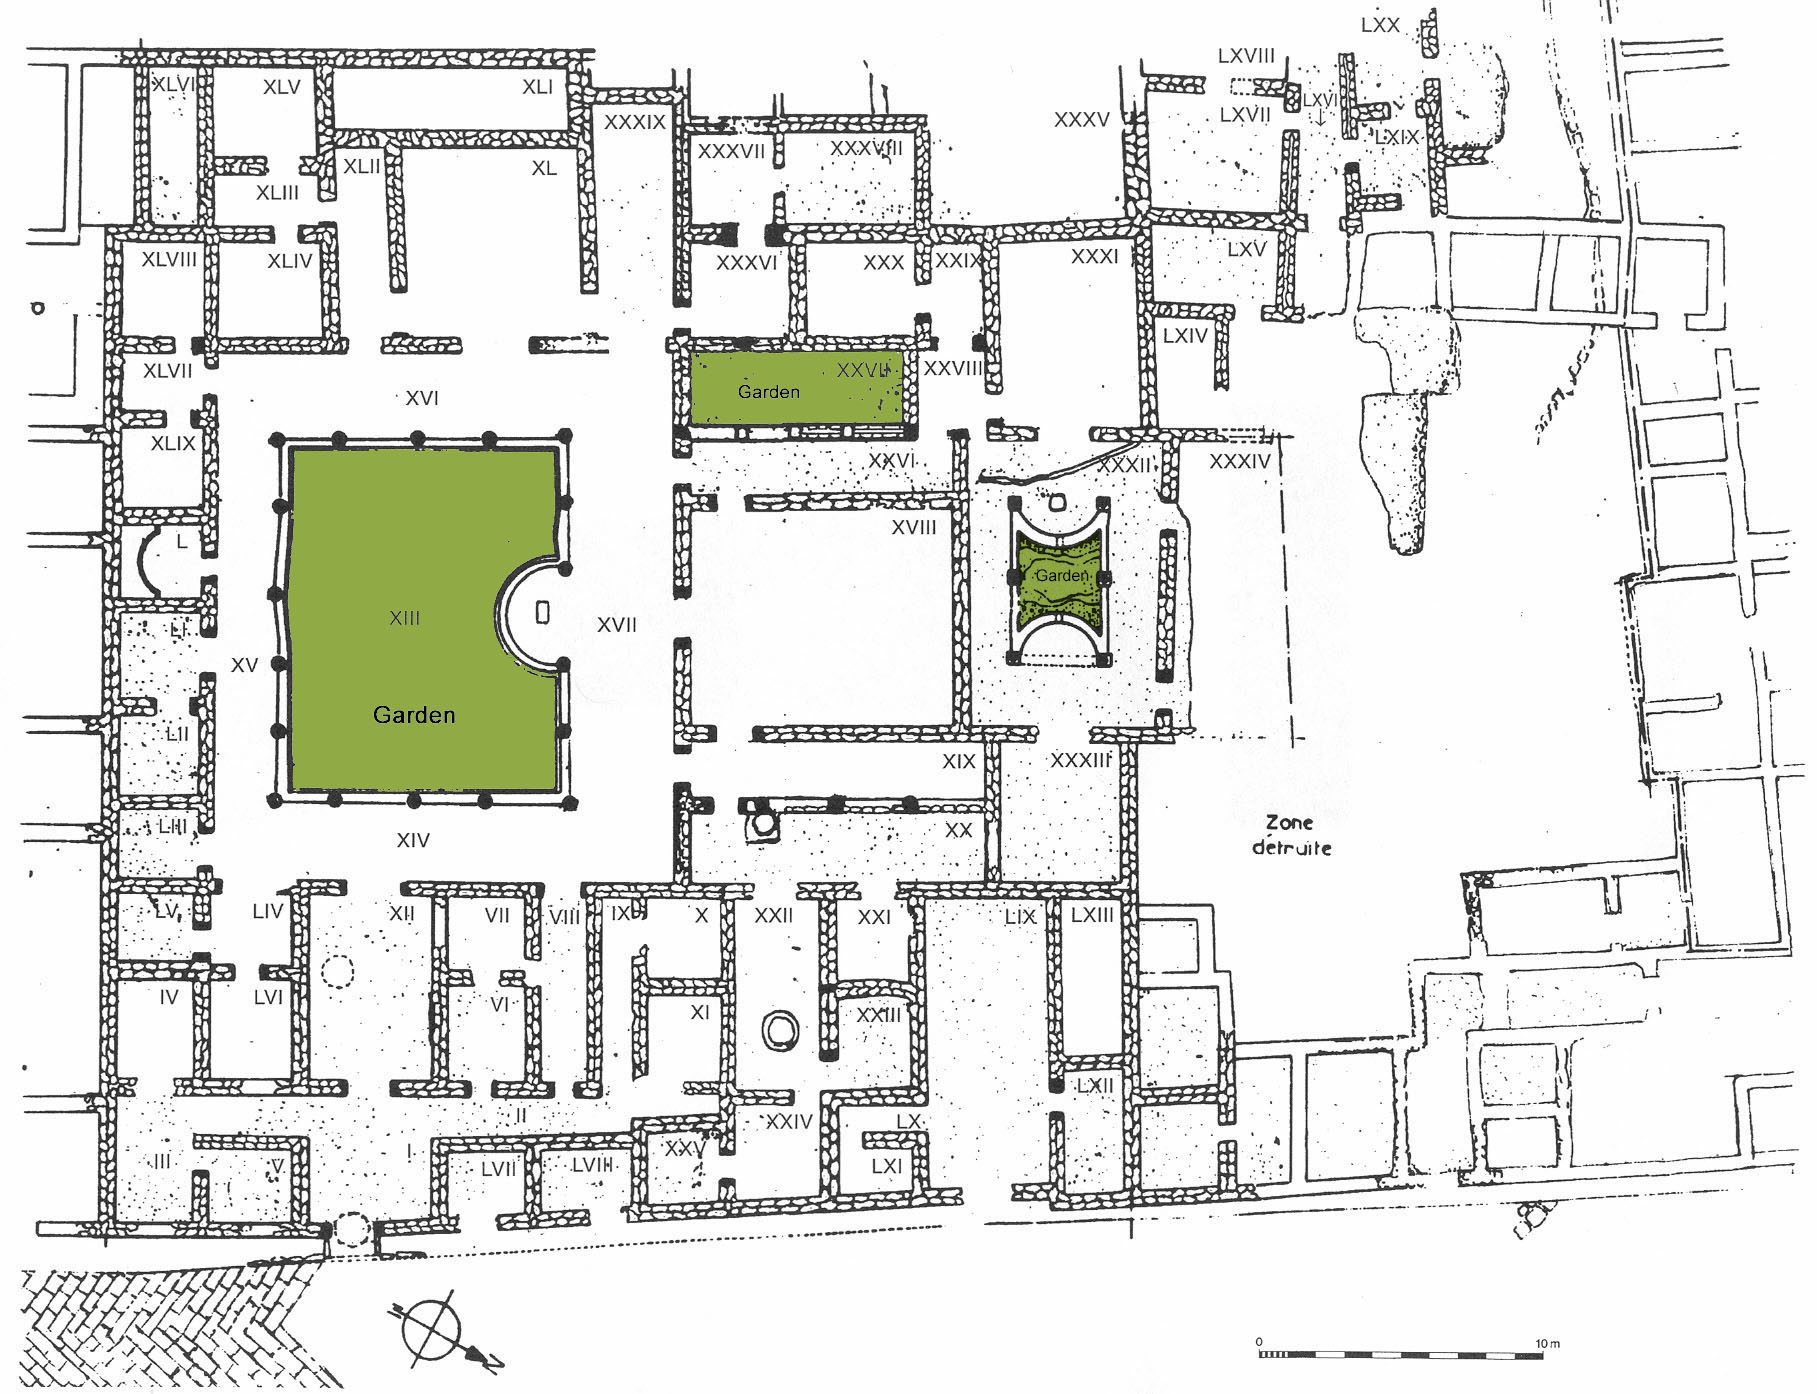 Fig. 1: Plan of the House of the Peacock.